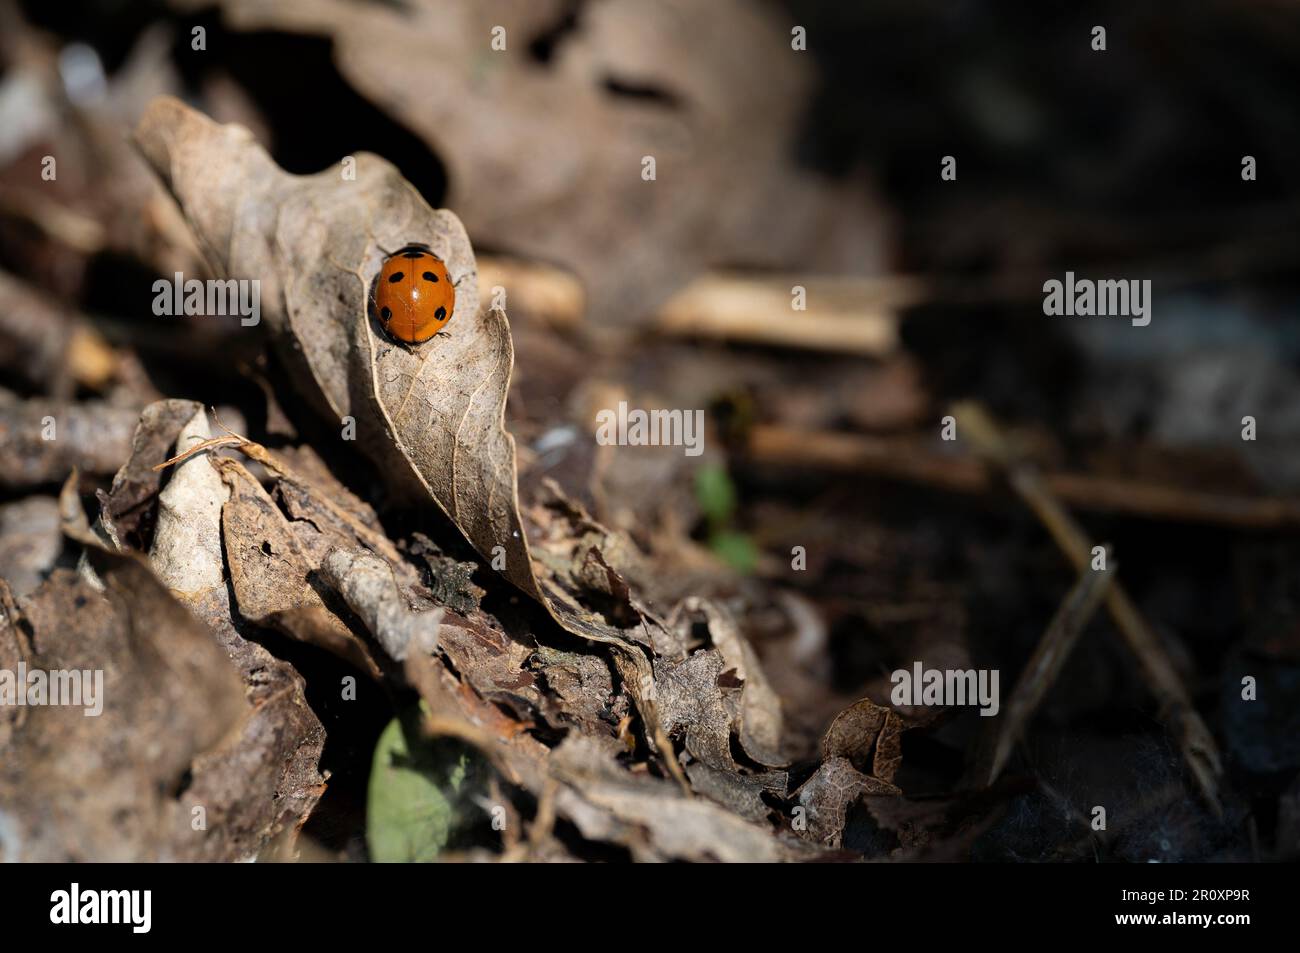 A ladybug on the dry leaf in sunlight. Brown leaves. Stock Photo